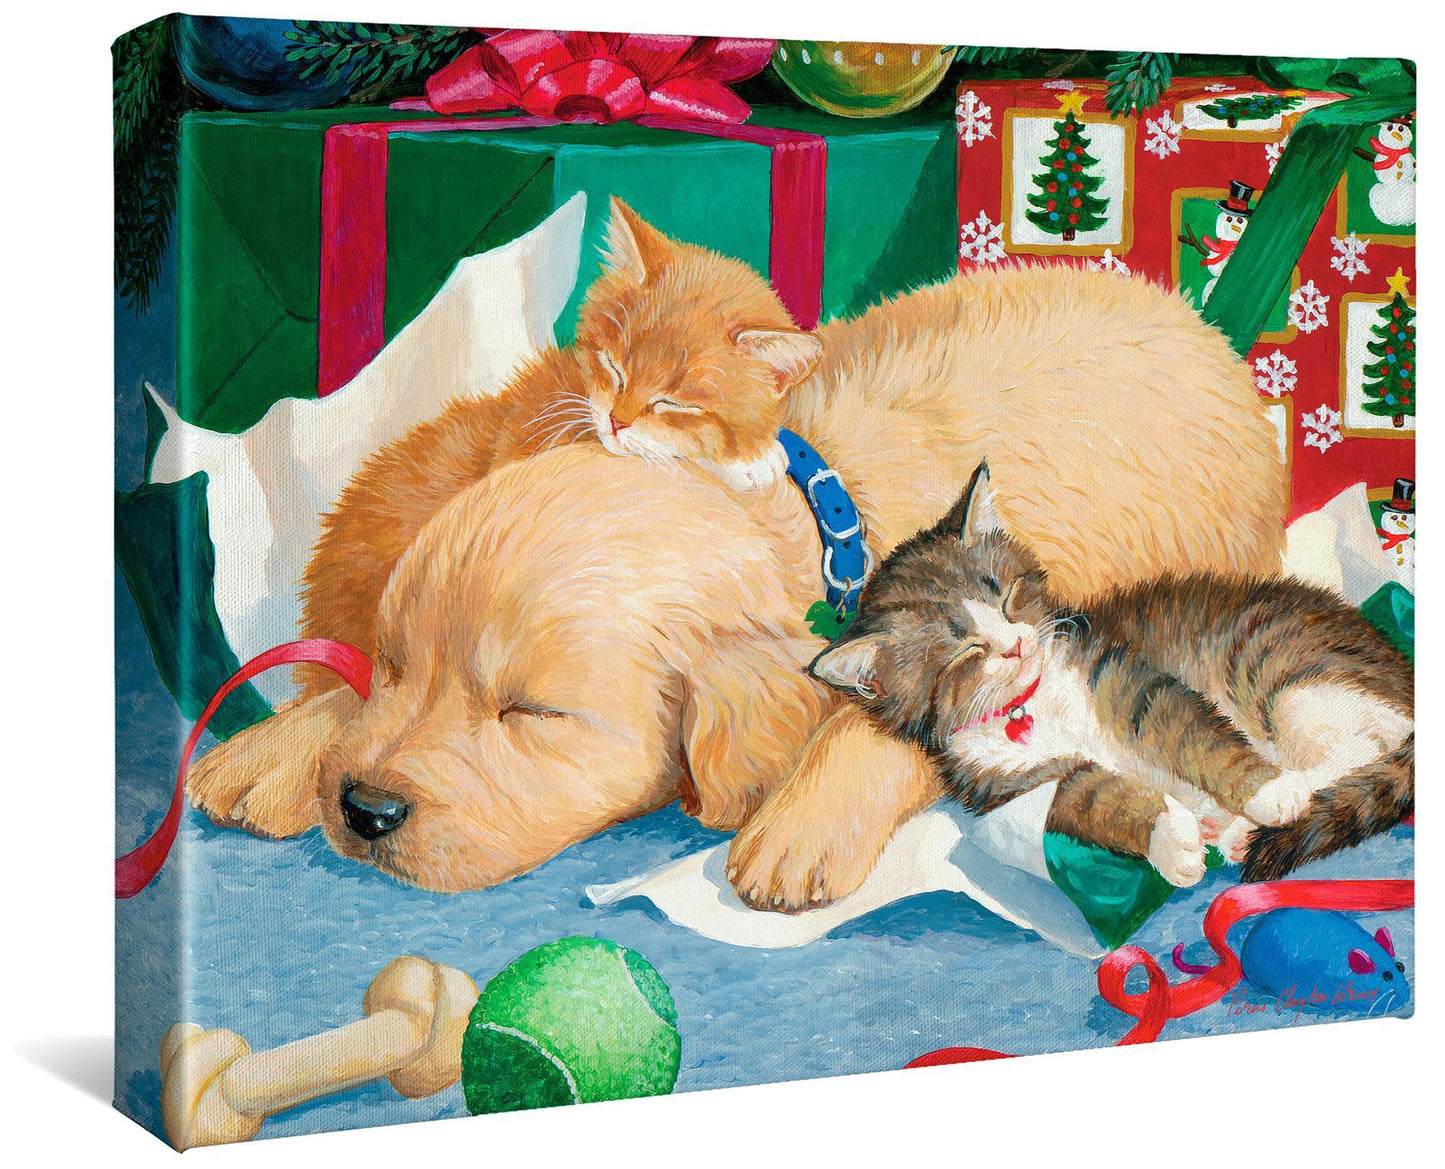 Too Much Fun—Puppy & Kittens Gallery Wrapped Canvas - Wild Wings